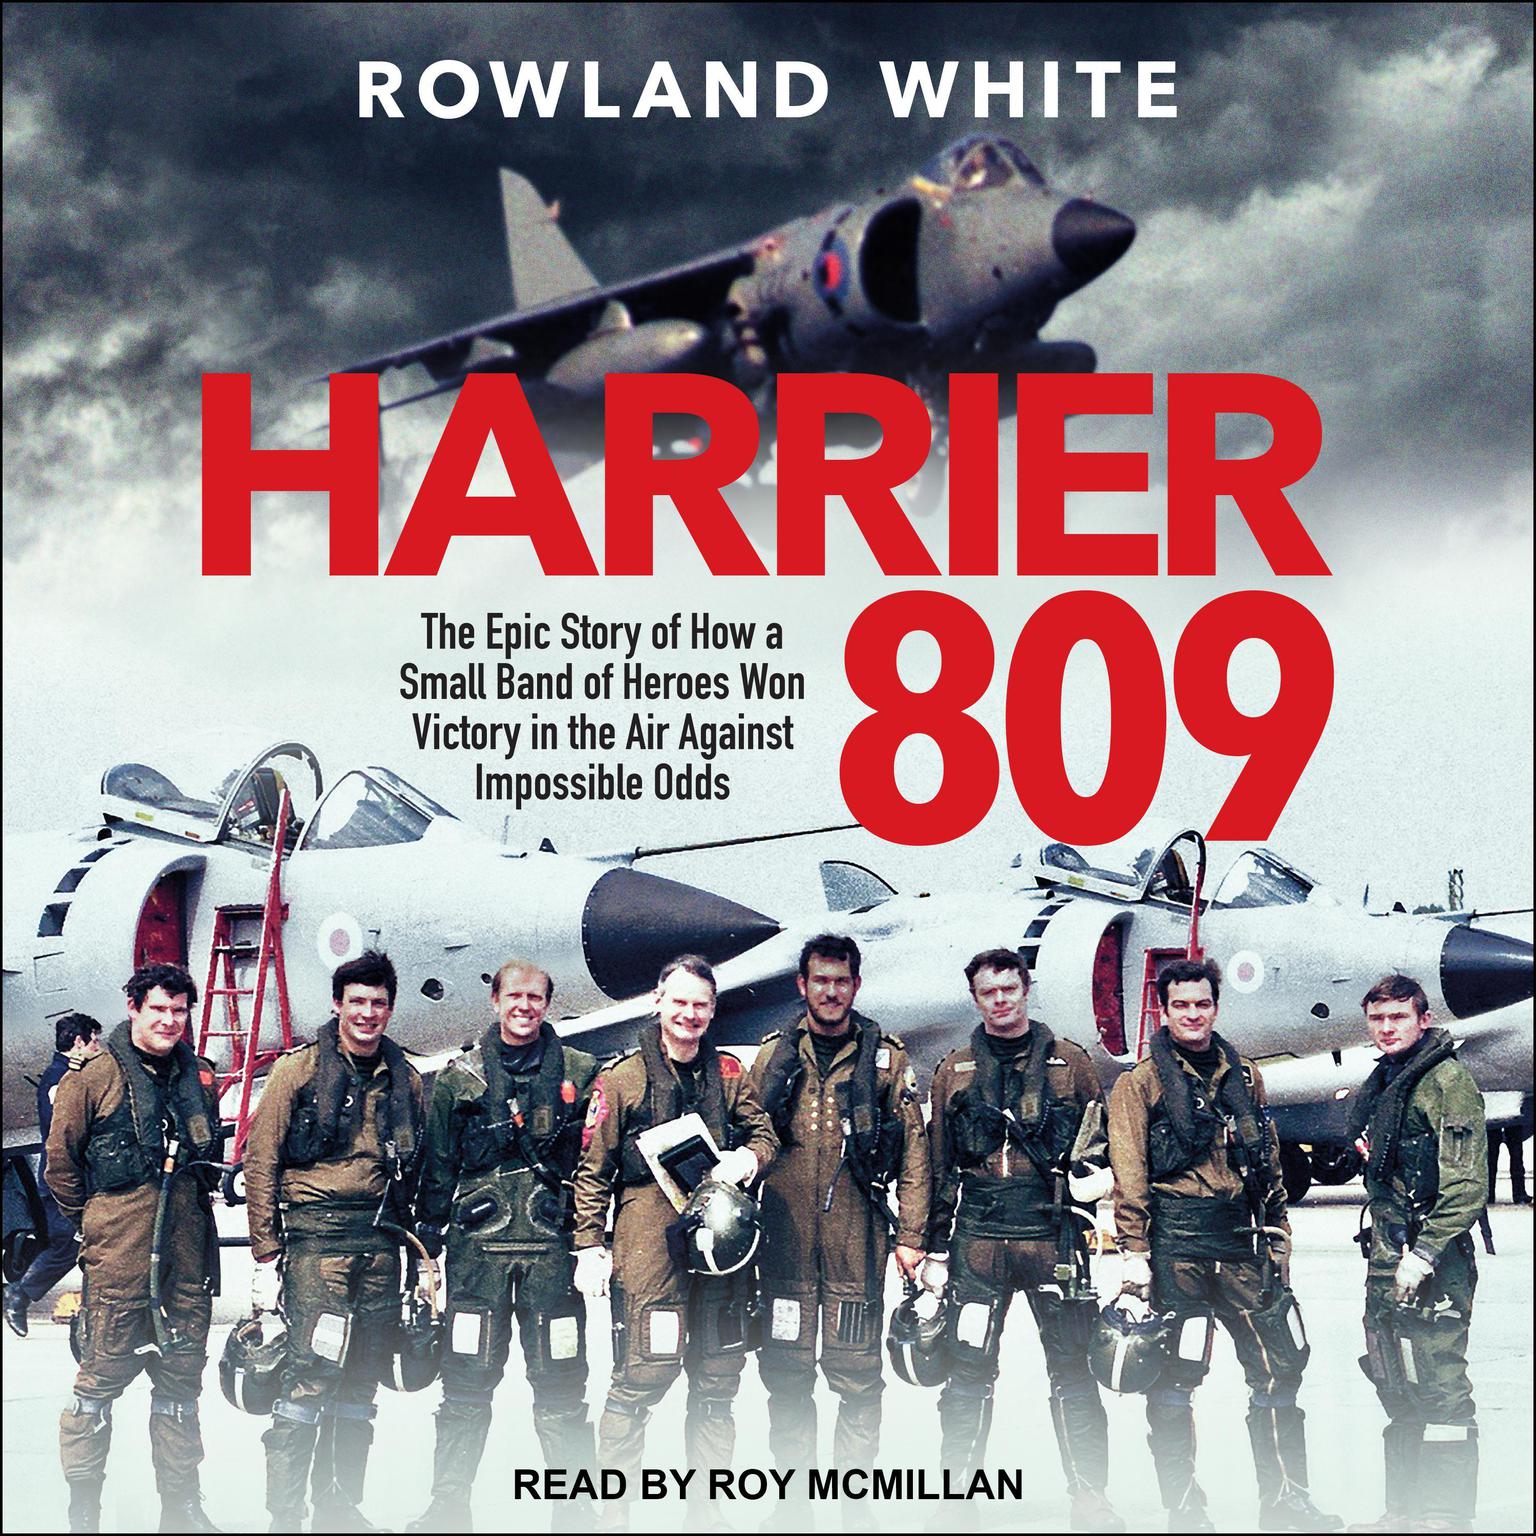 Harrier 809: The Epic Story of How a Small Band of Heroes Won Victory in the Air Against Impossible Odds Audiobook, by Rowland White